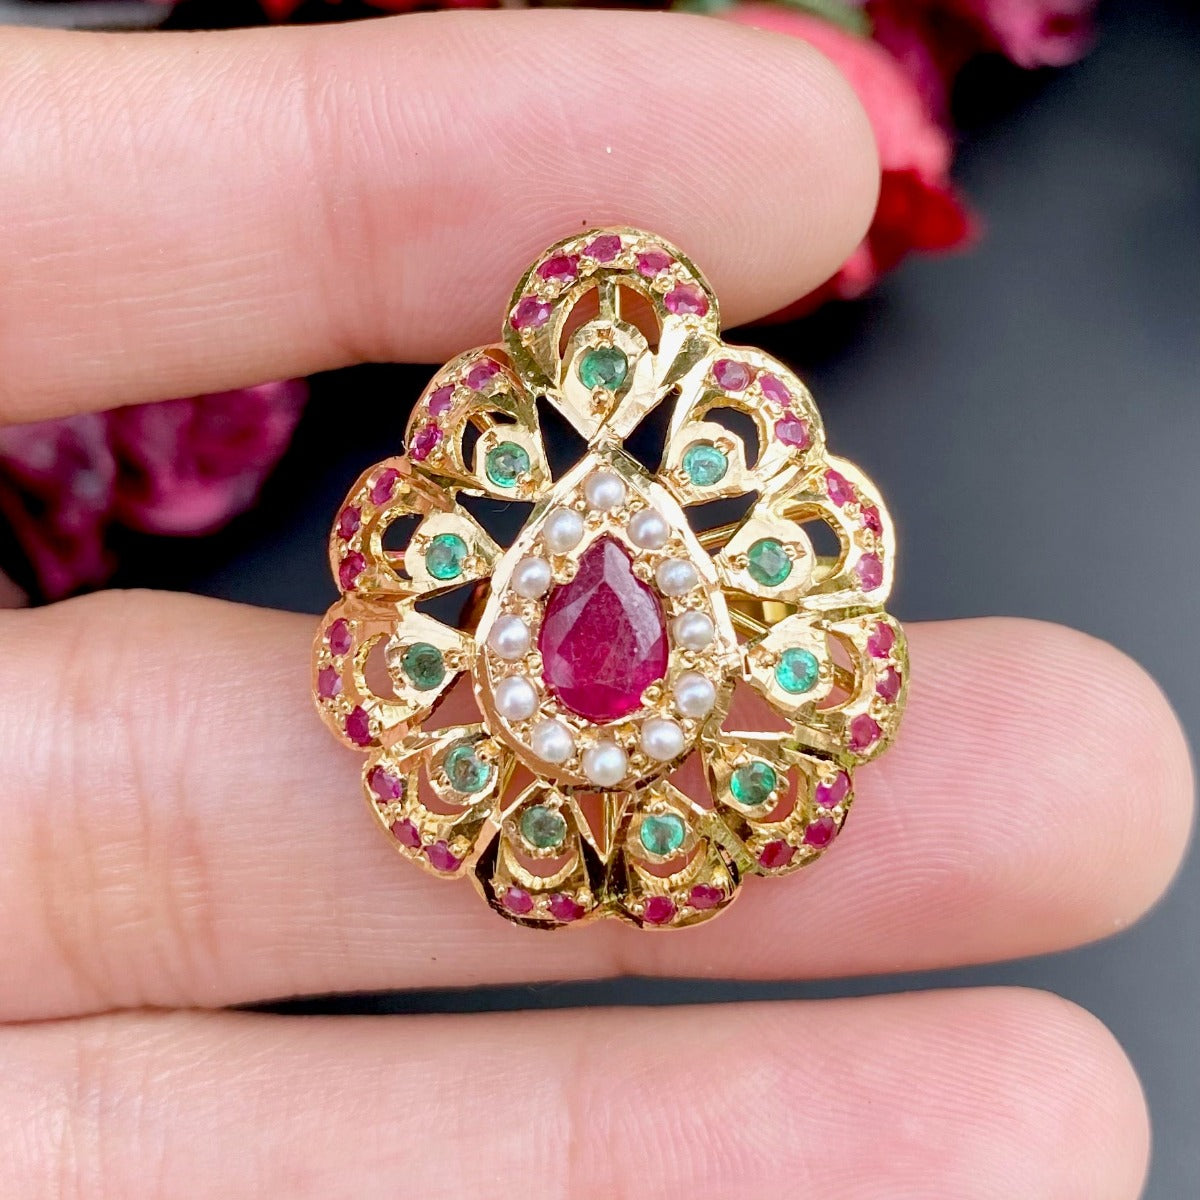 handmade gold ring studded with precious stones